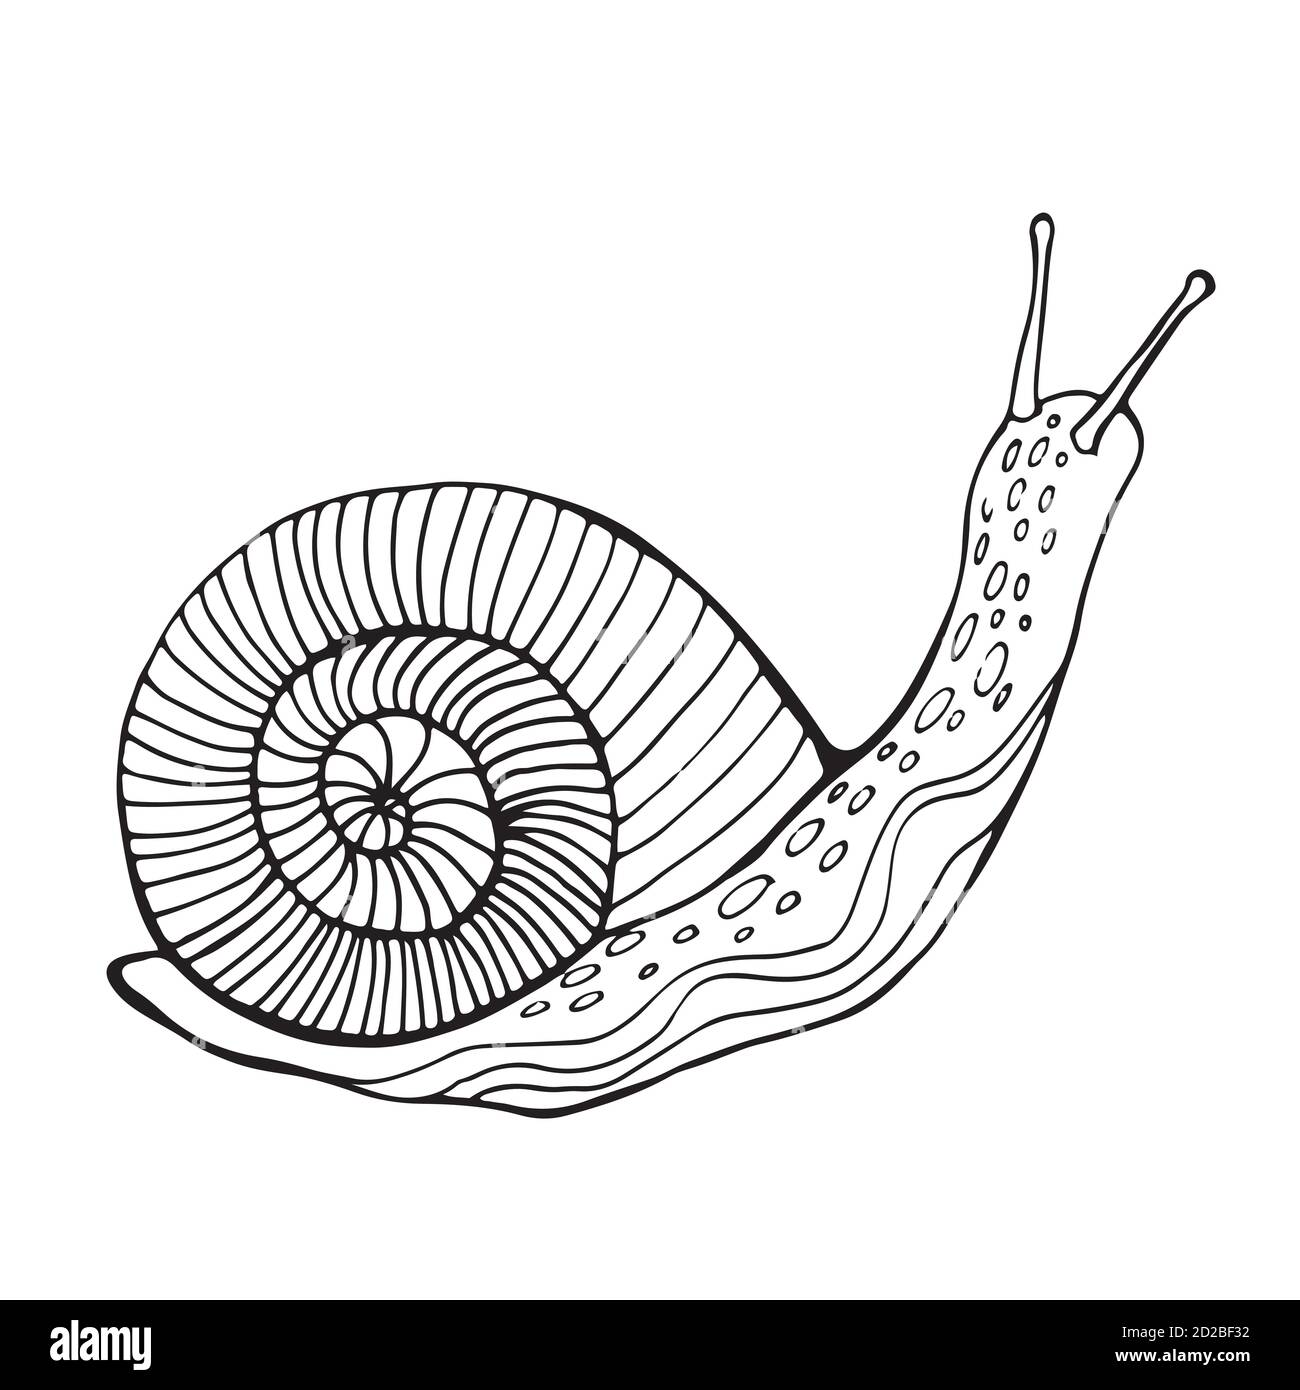 Snail coloring page for children and adults stock vector image art